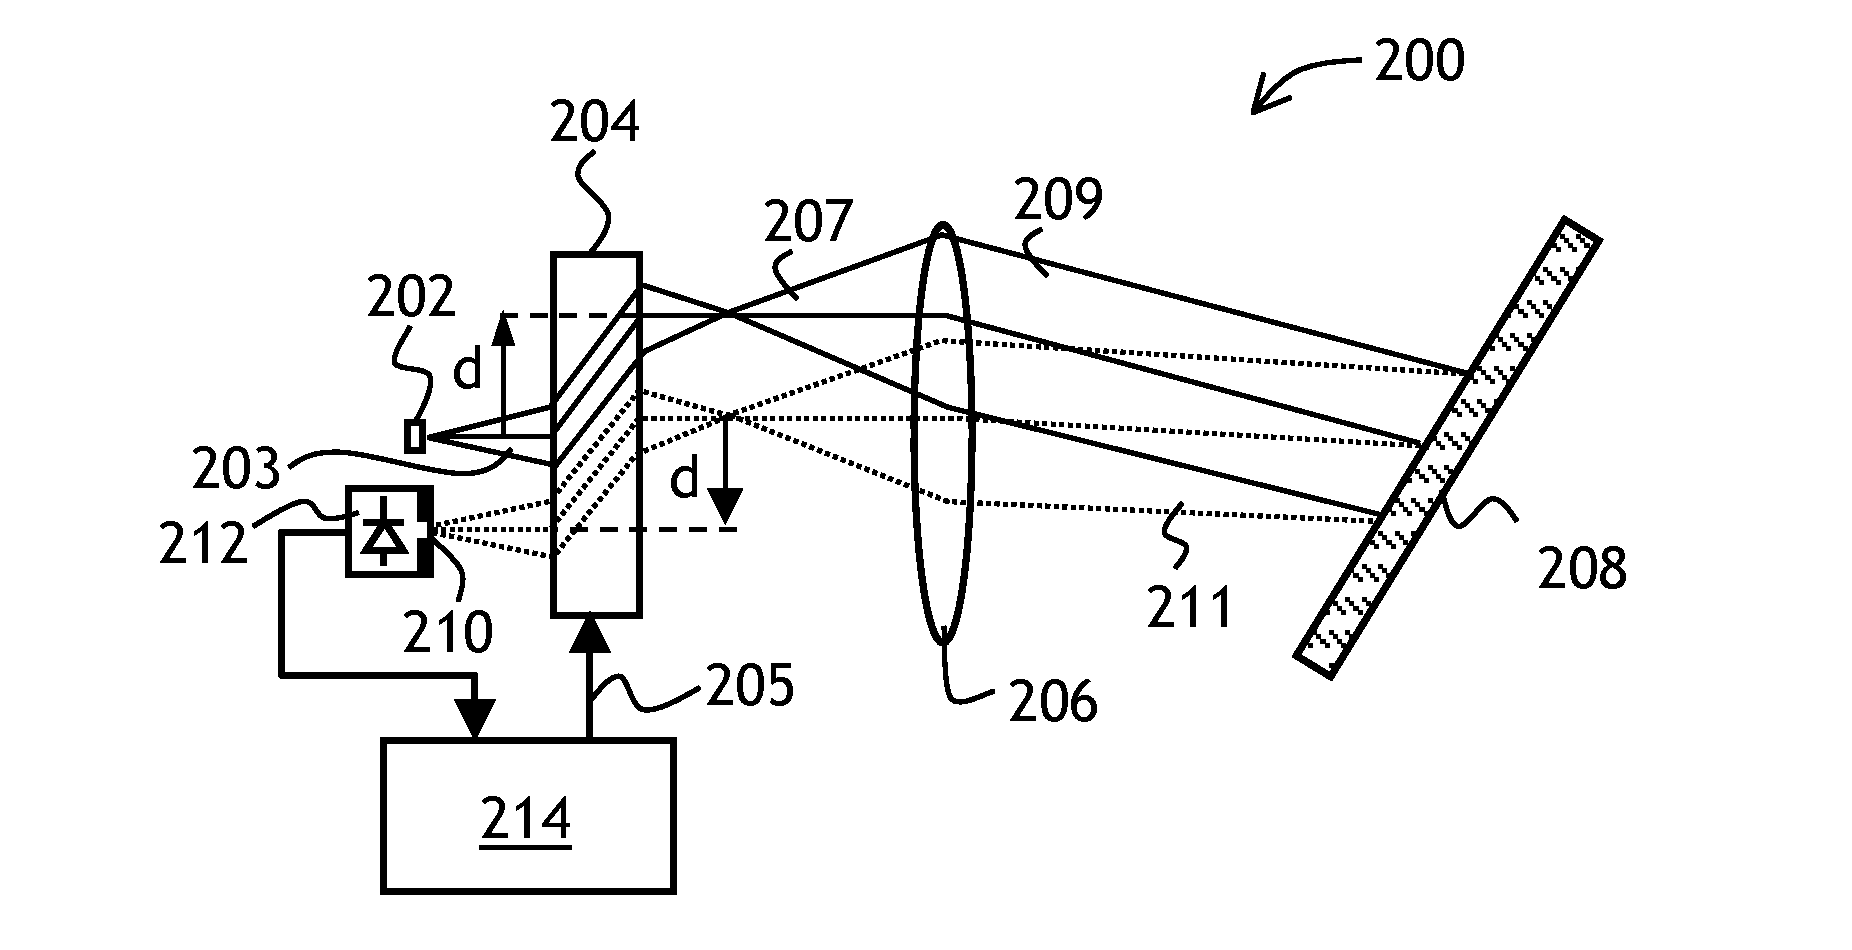 Tunable optical filter and spectrometer